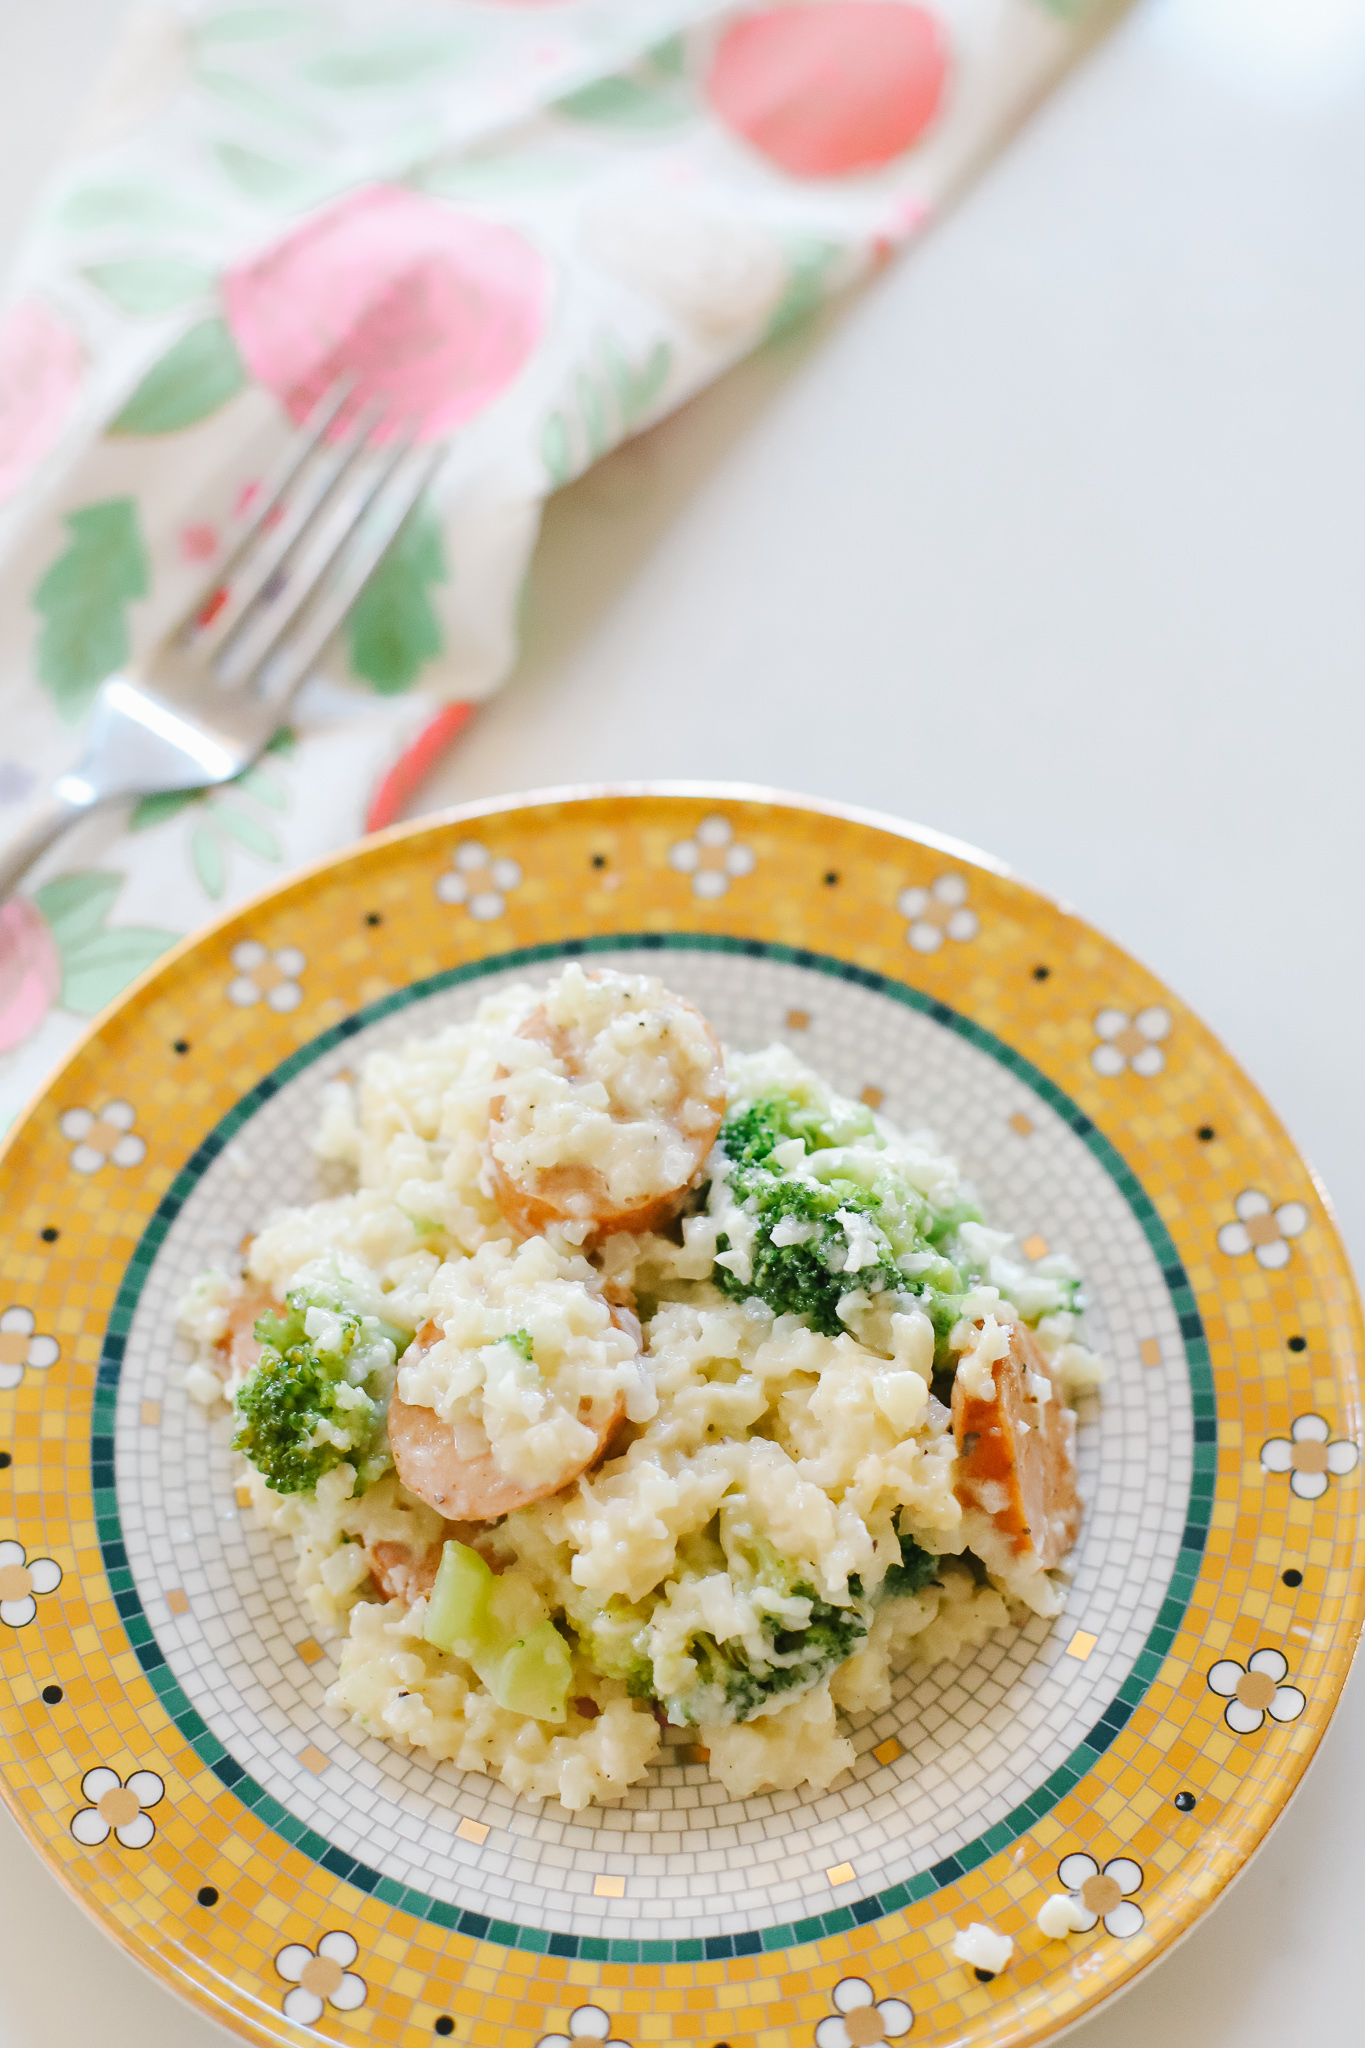 Easy Keto dinner! This easy & delicious low-carb broccoli & chicken sausage casserole is extra cheesy, full of flavor, and a quick way to get dinner on the table!